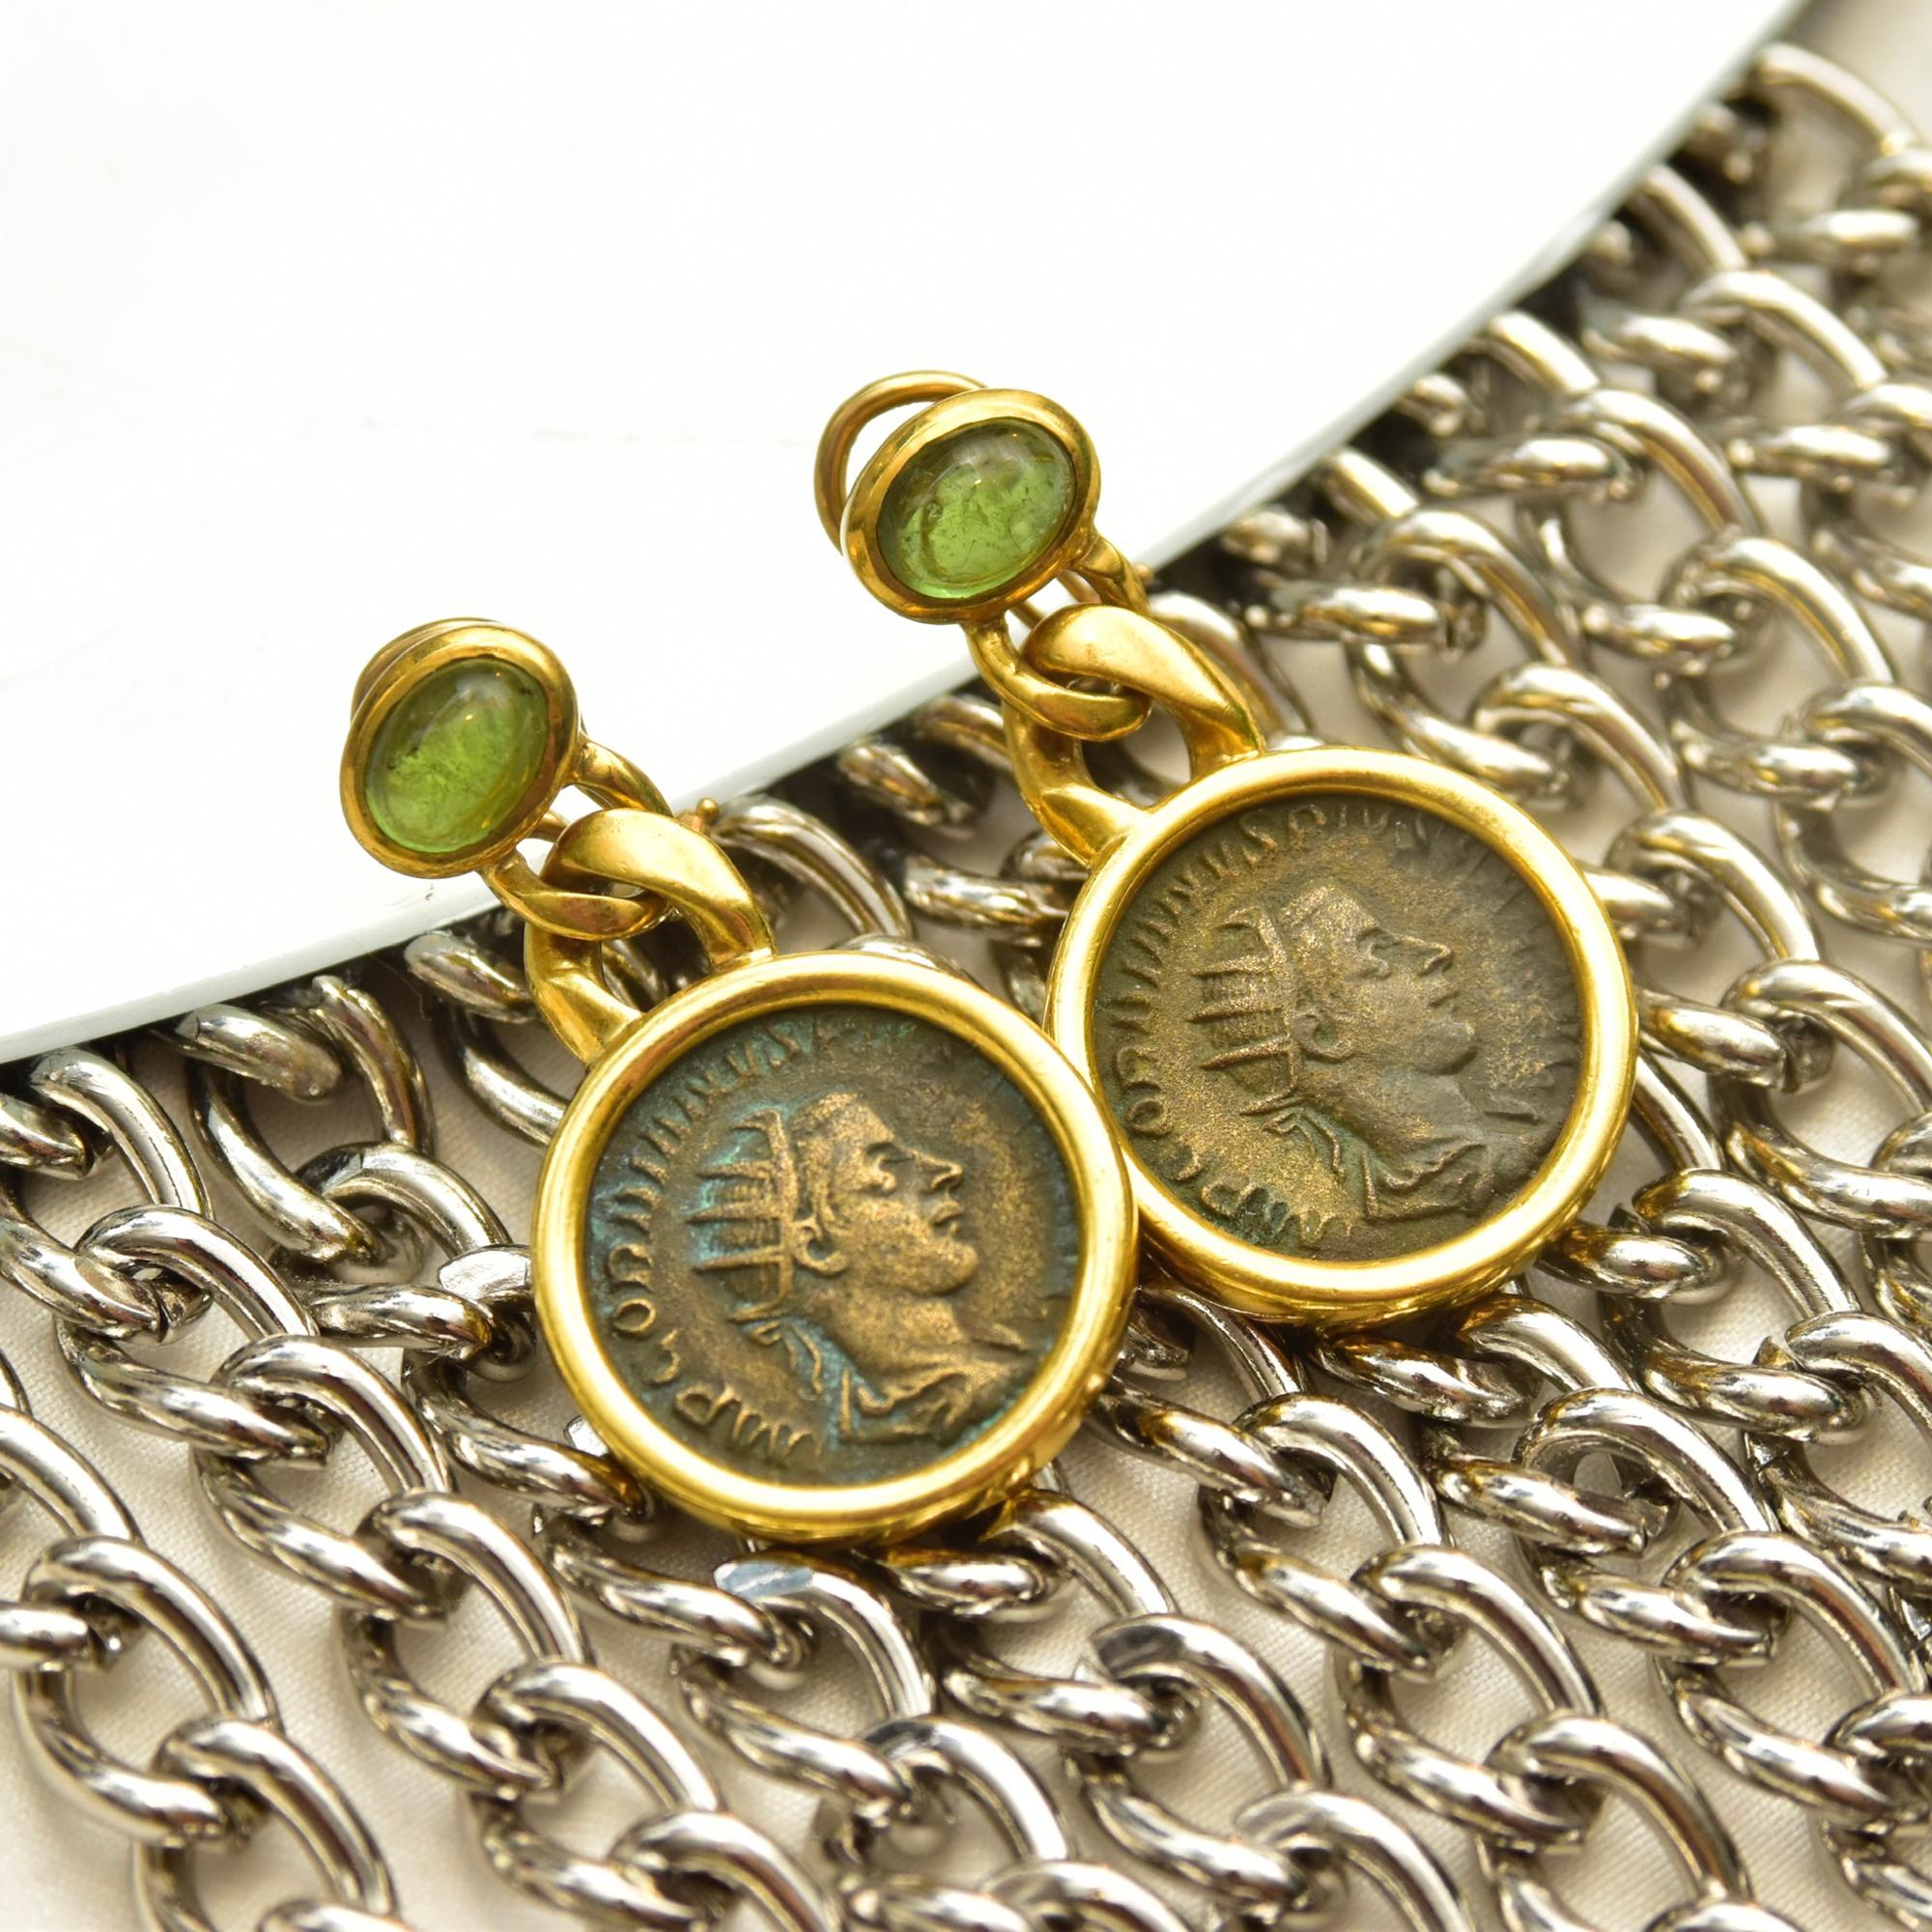 A lavish pair of 18k ancient greek coin dangle earrings with green aventurine accents. Each earring features an open circle bezel set coin, connected via a solid gold chain link to a small gemstone setting. The coins look like they're from the